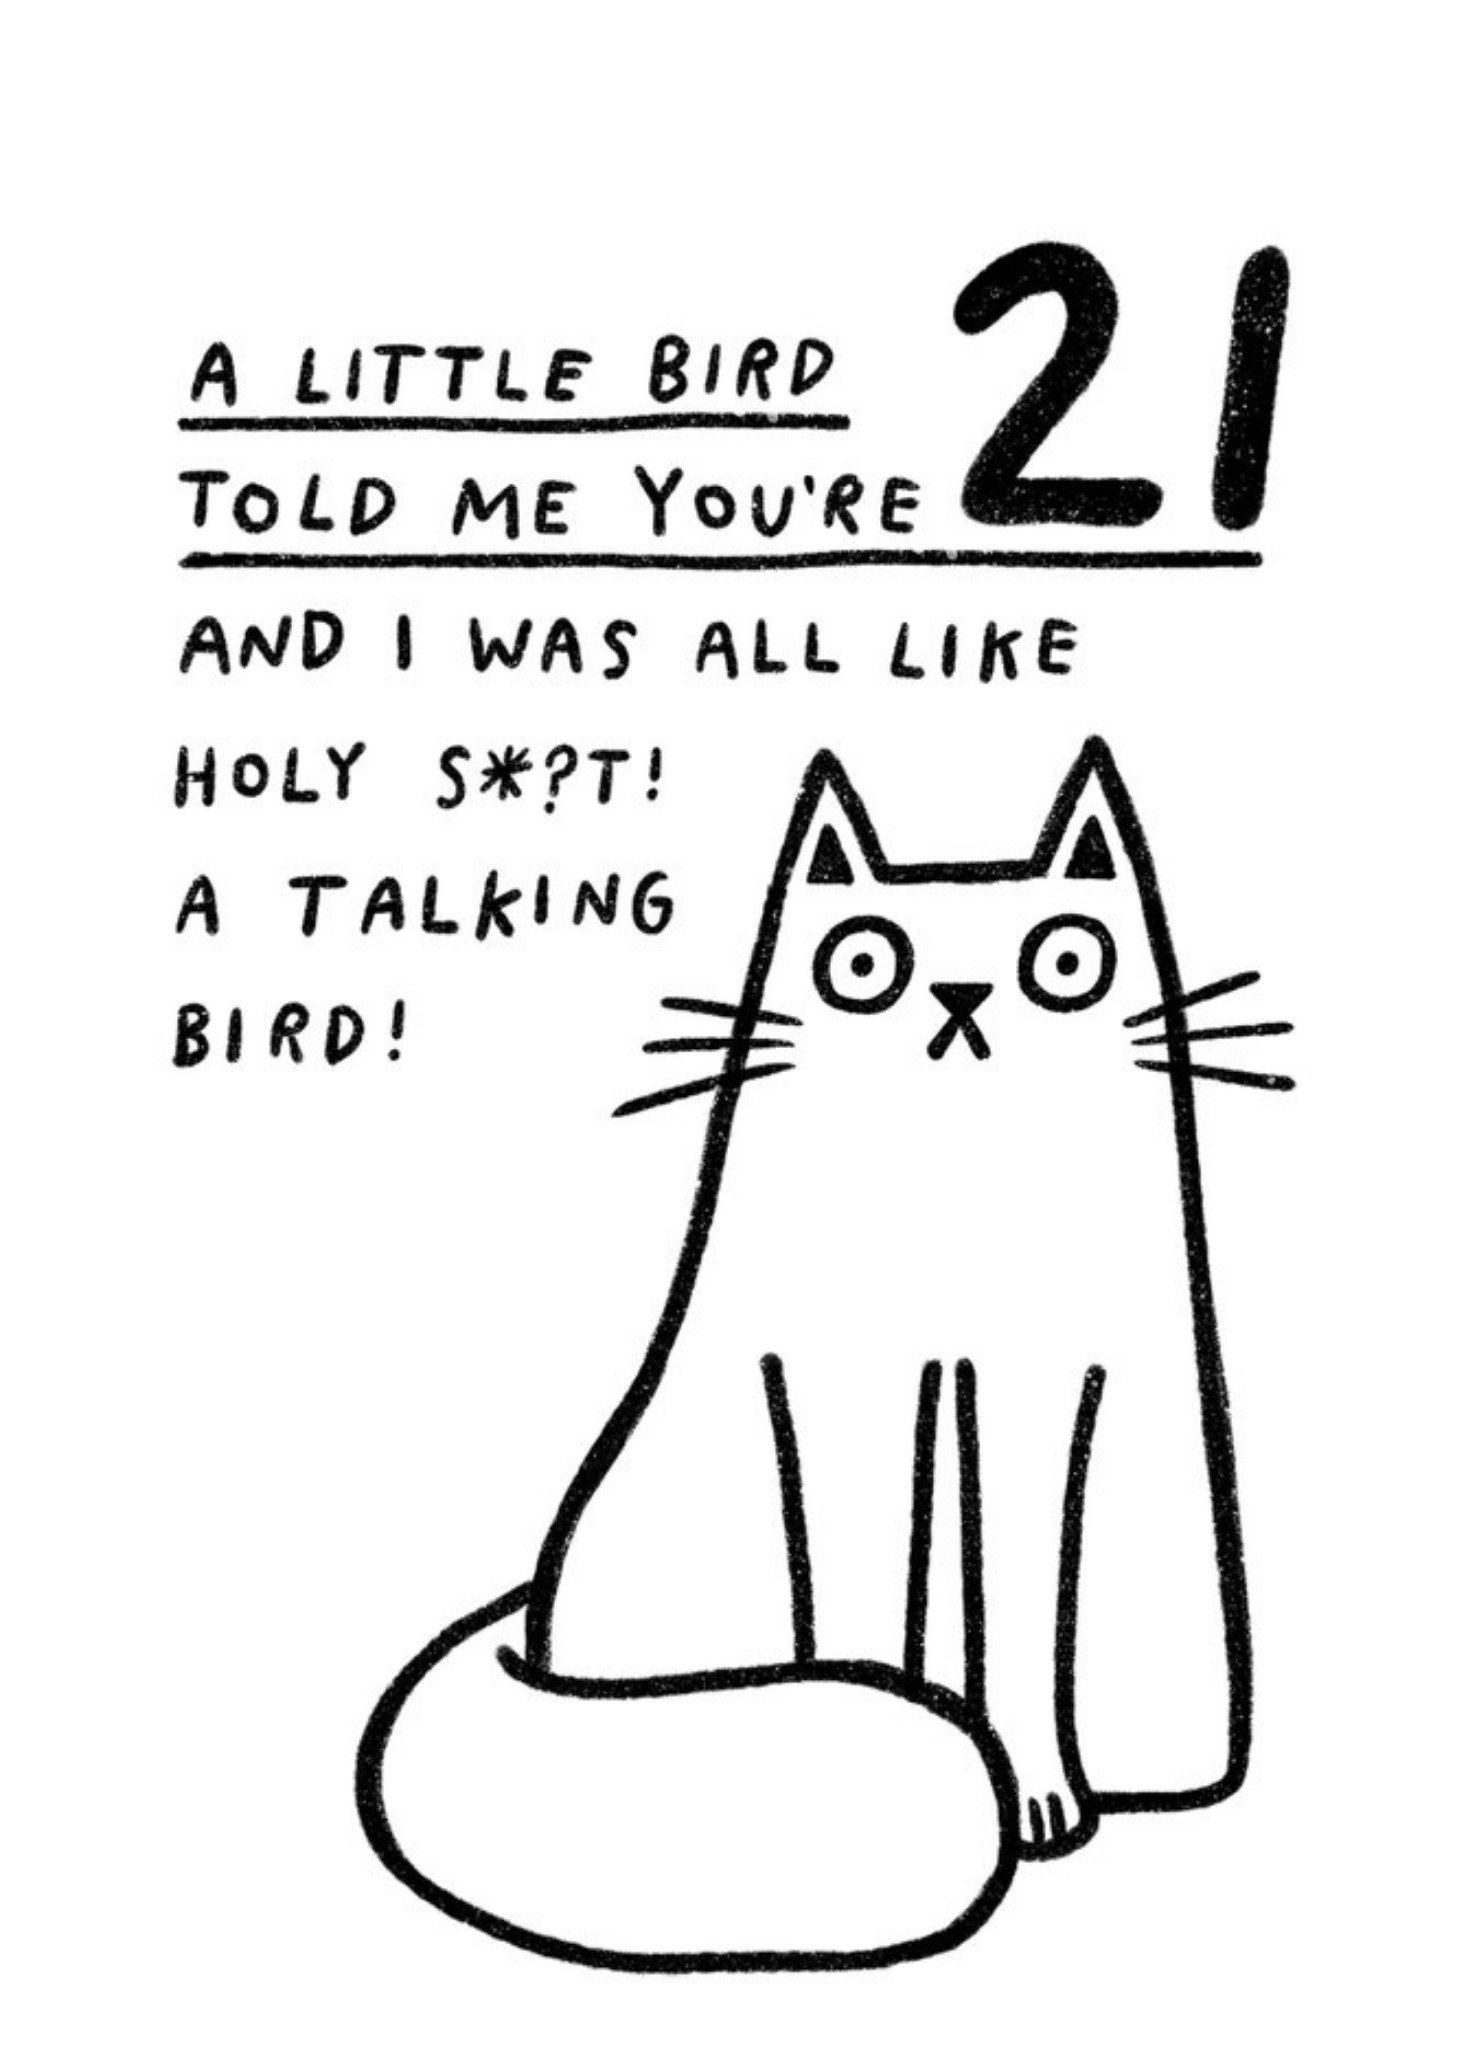 Moonpig Pigment A Little Bird Told Me You're 21 Holy Shit A Talking Bird Funny Rude Birthday Card, L